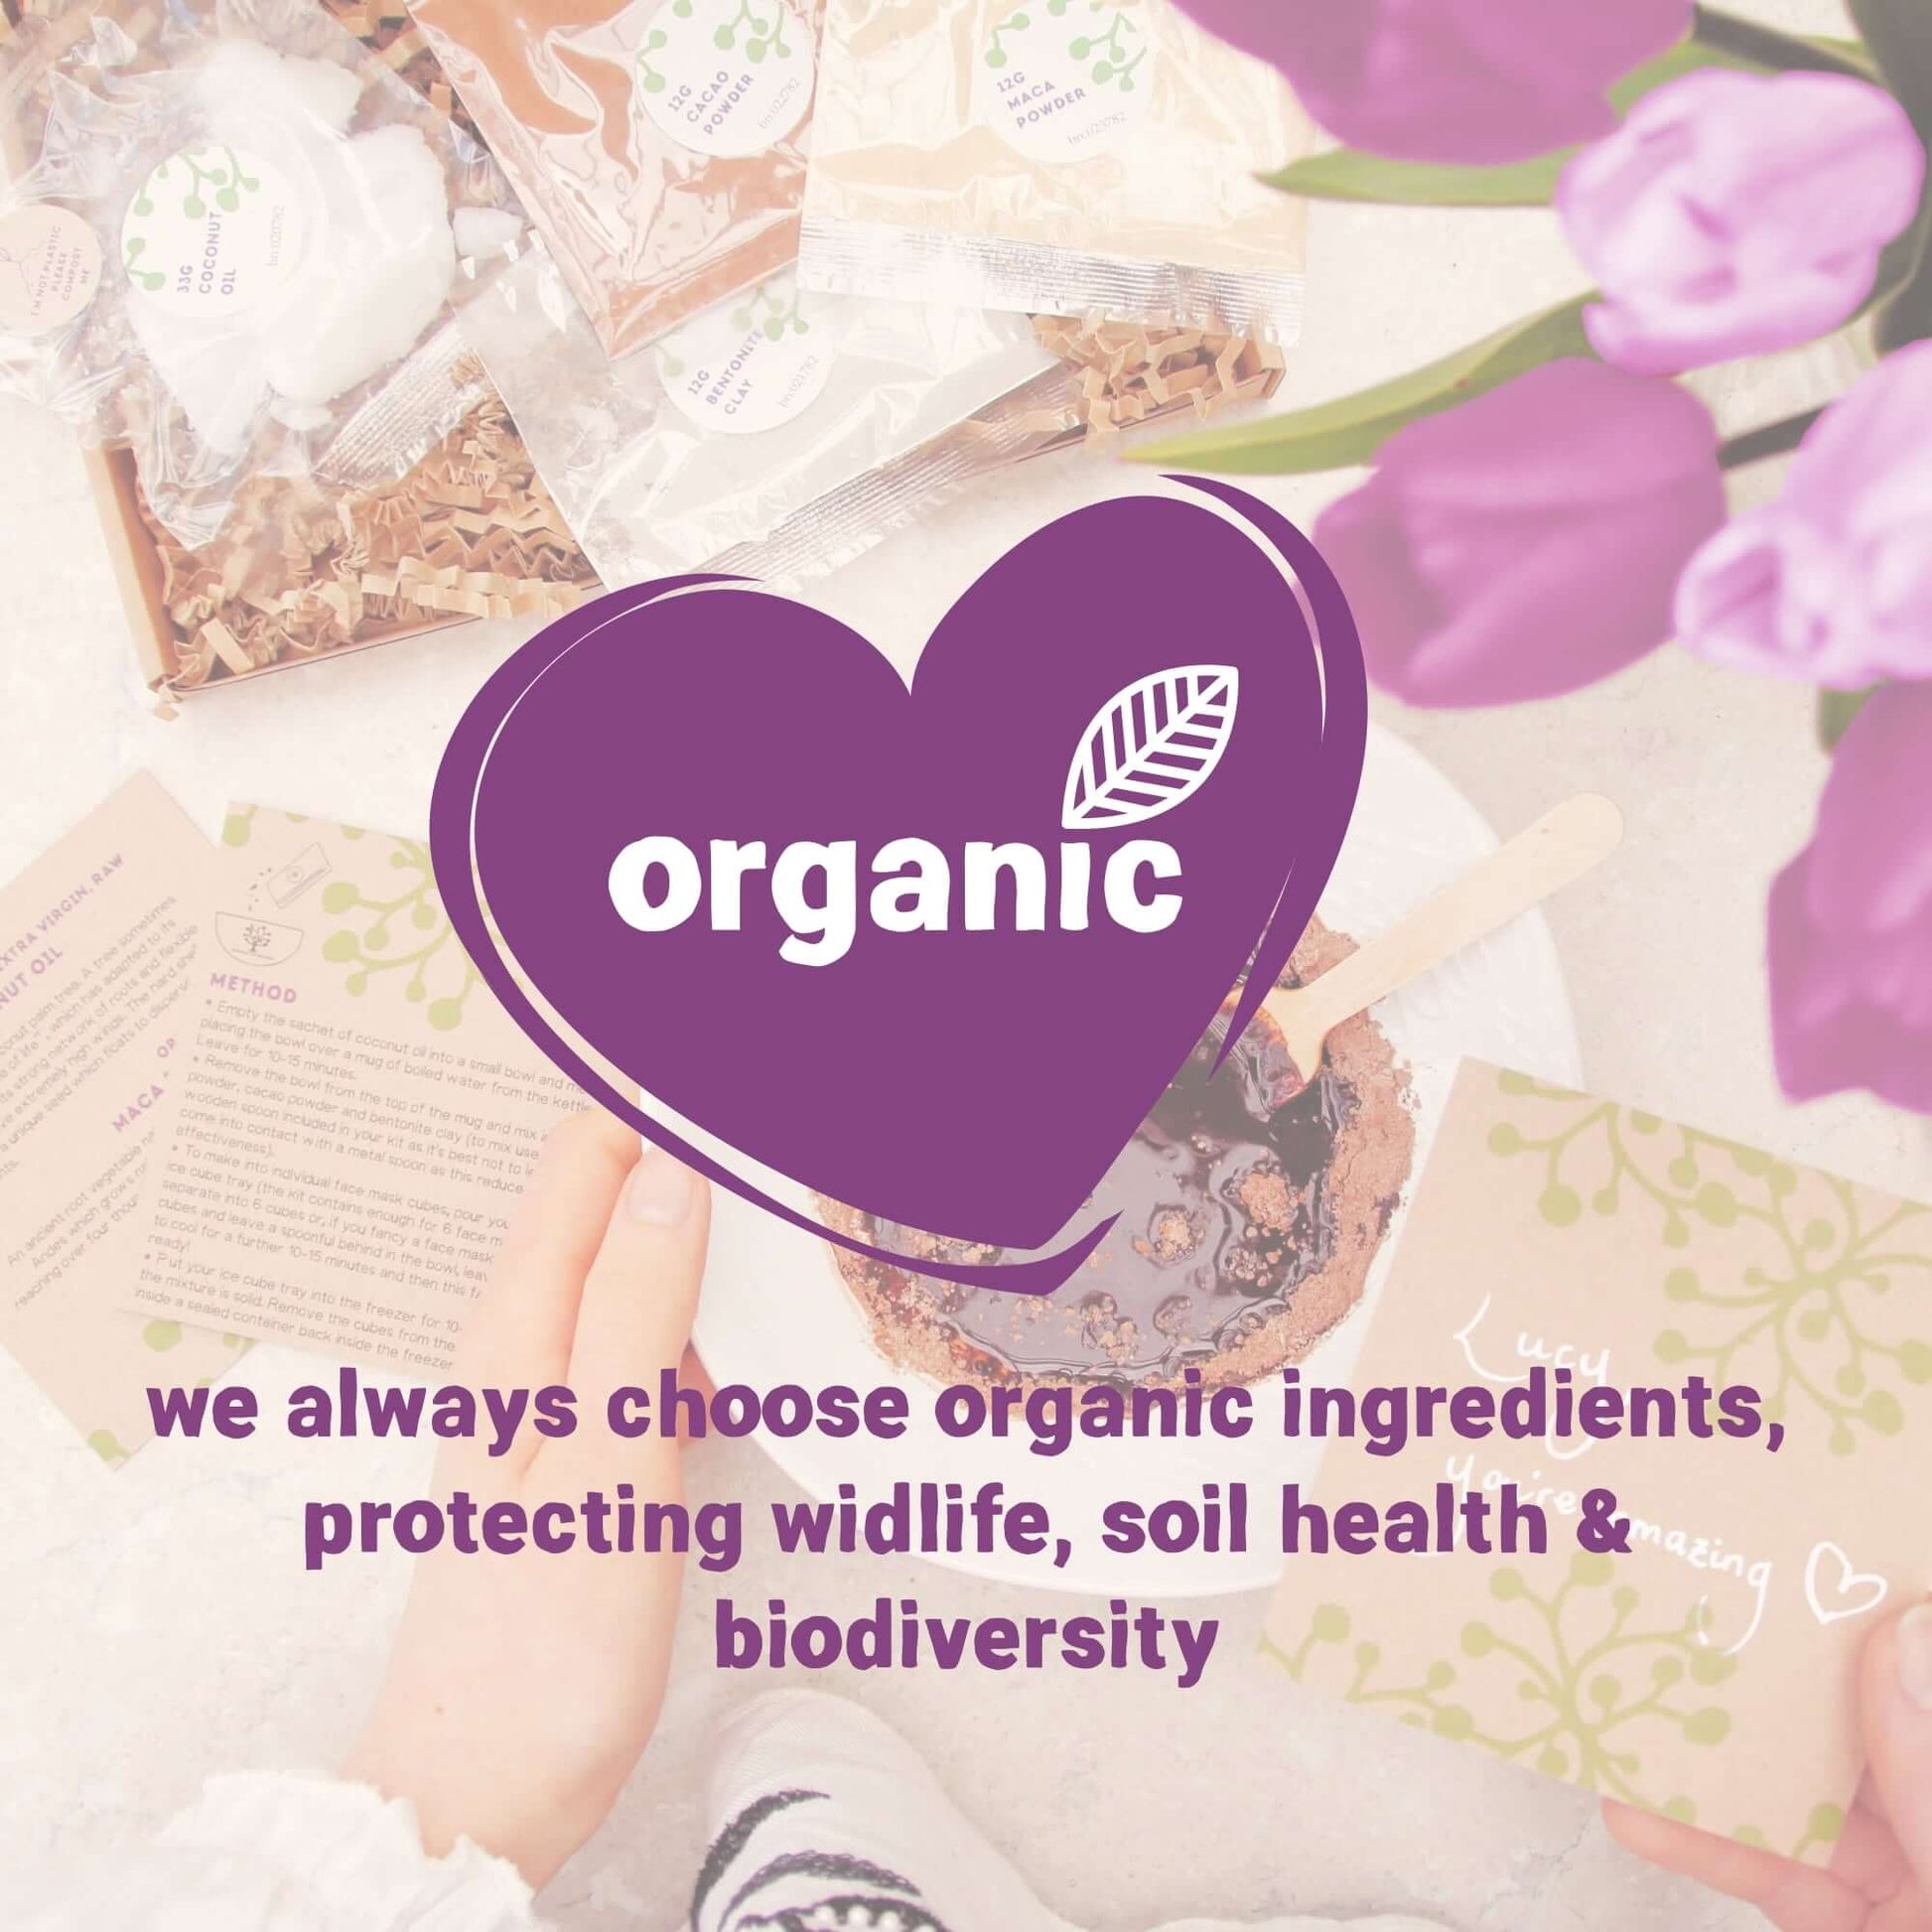 organic ingredients to make skincare inside birthday letterbox gift